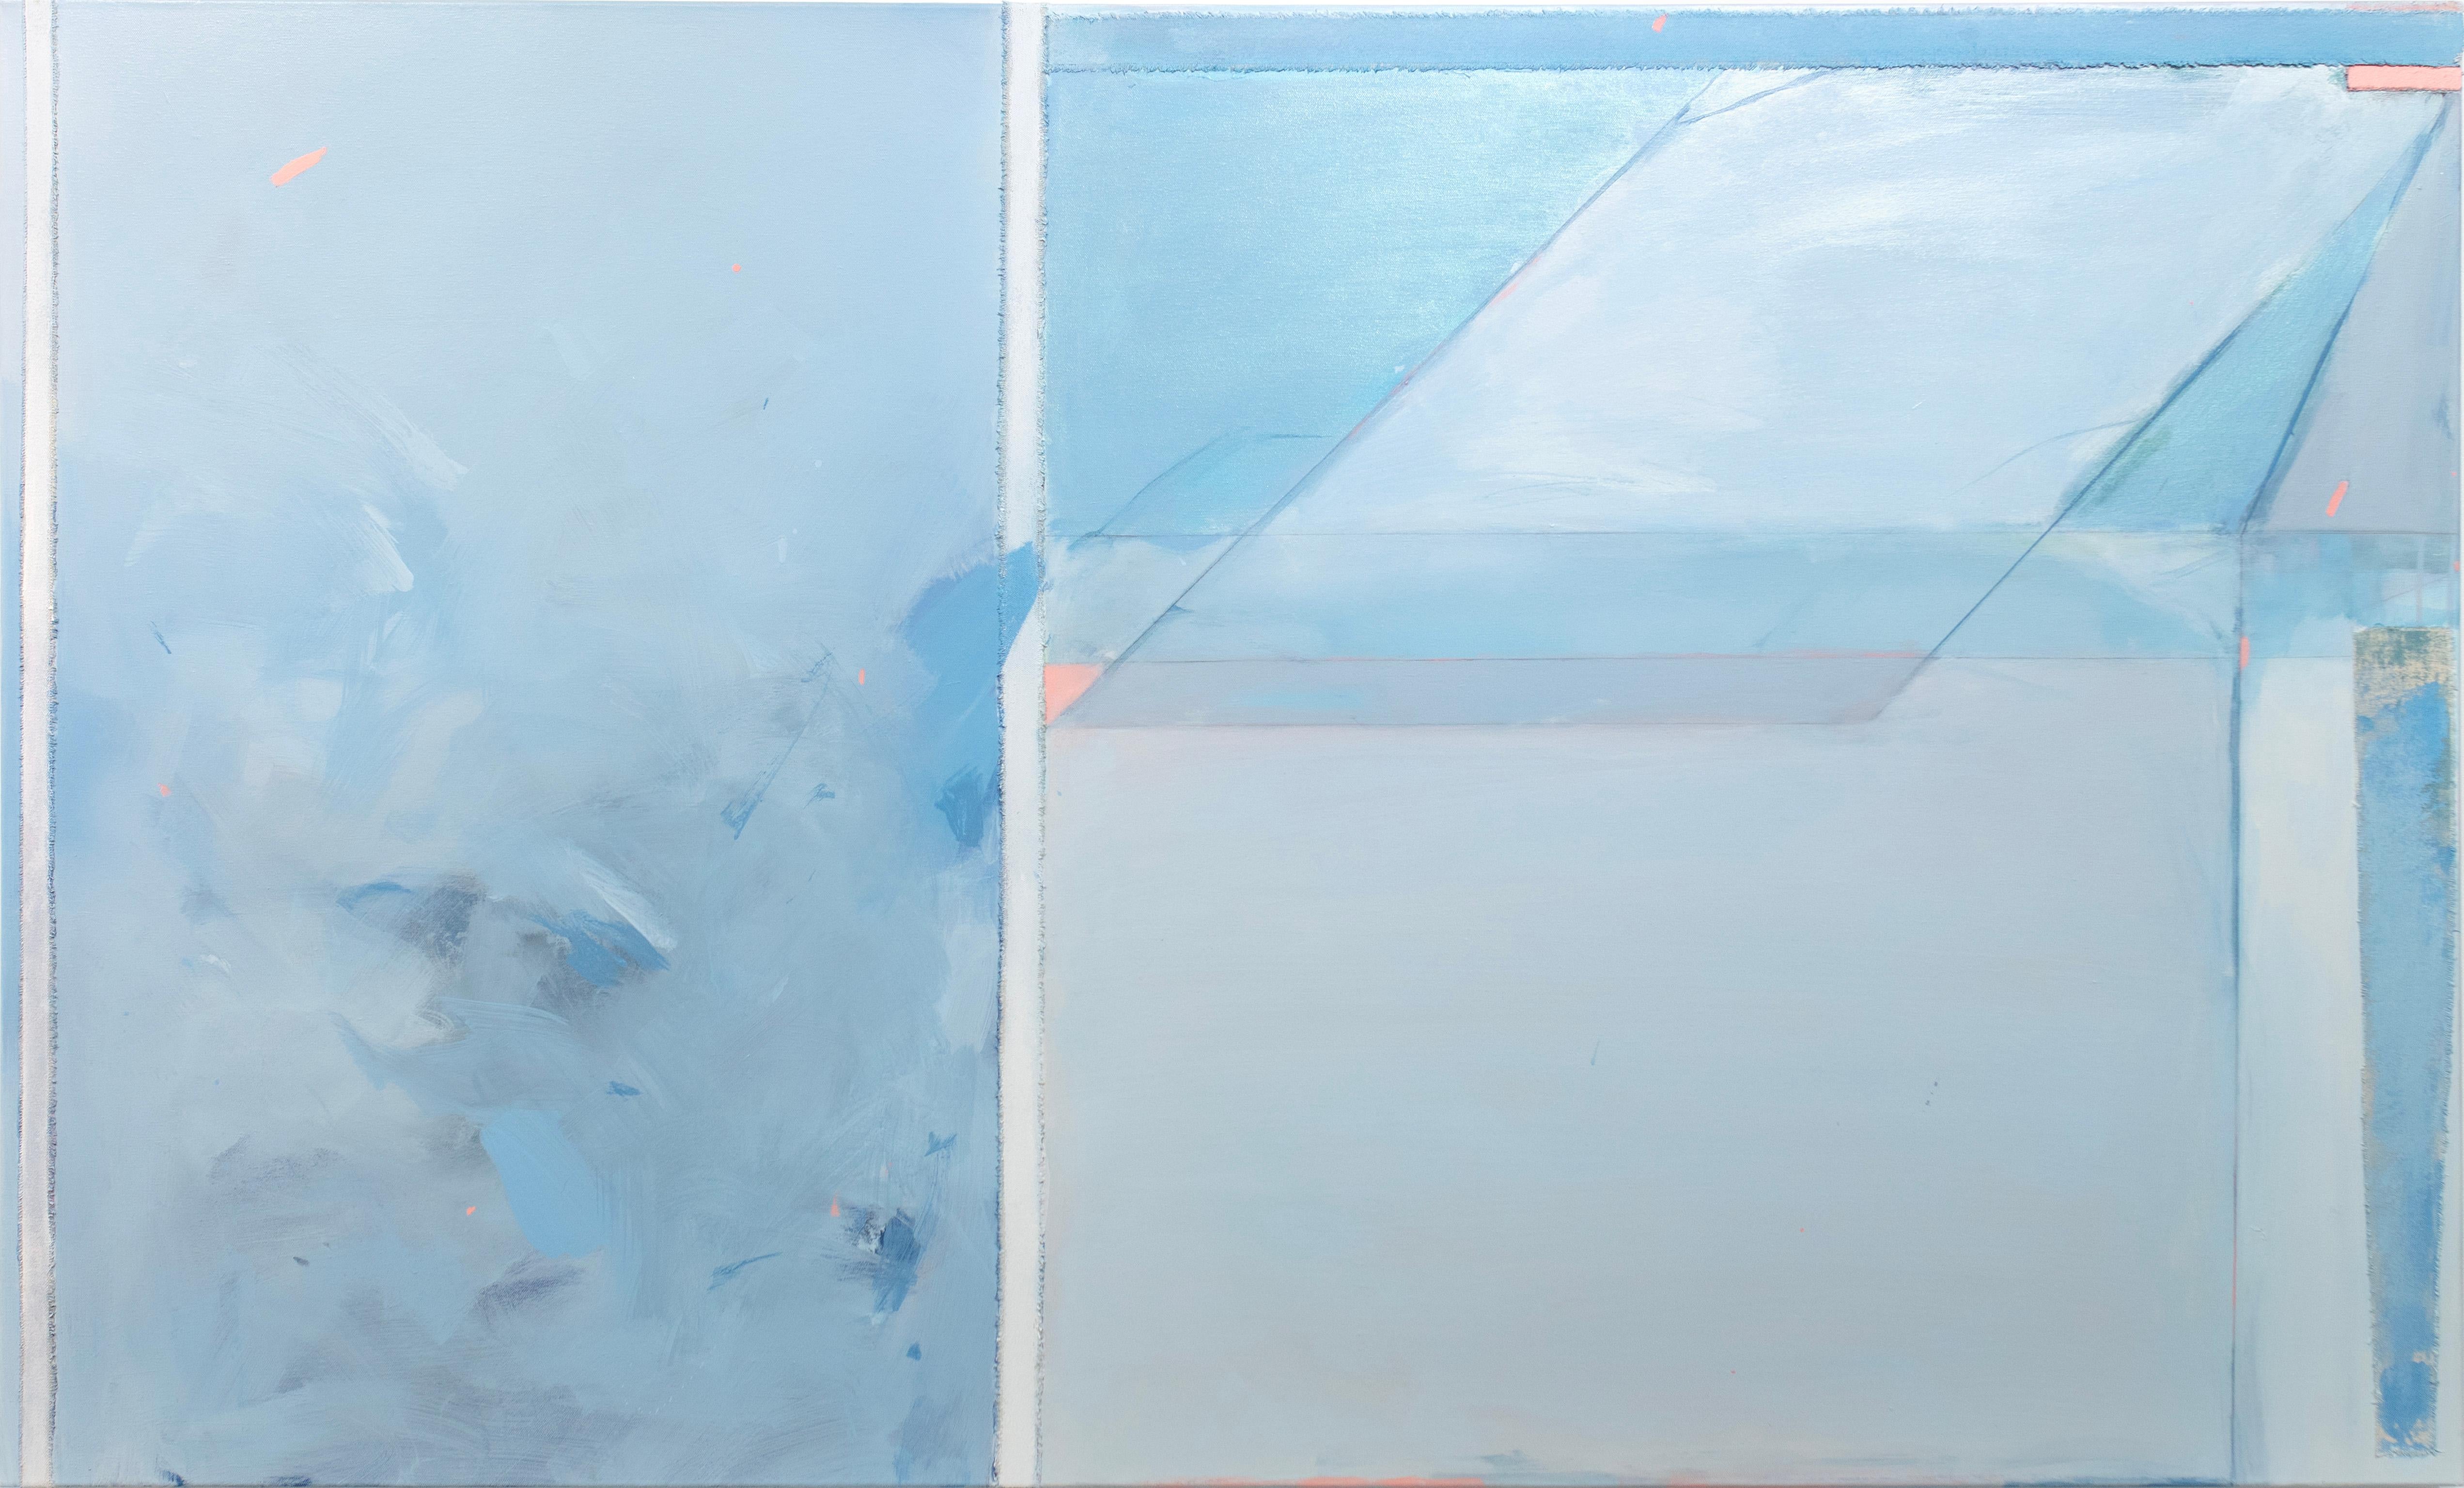 This large abstract painting by Kelly Rossetti is made with acrylic paint and raw canvas pieces assembled on gallery wrapped canvas. It features a light blue palette with light salmon pink accents throughout, with geometric horizontal and diagonal